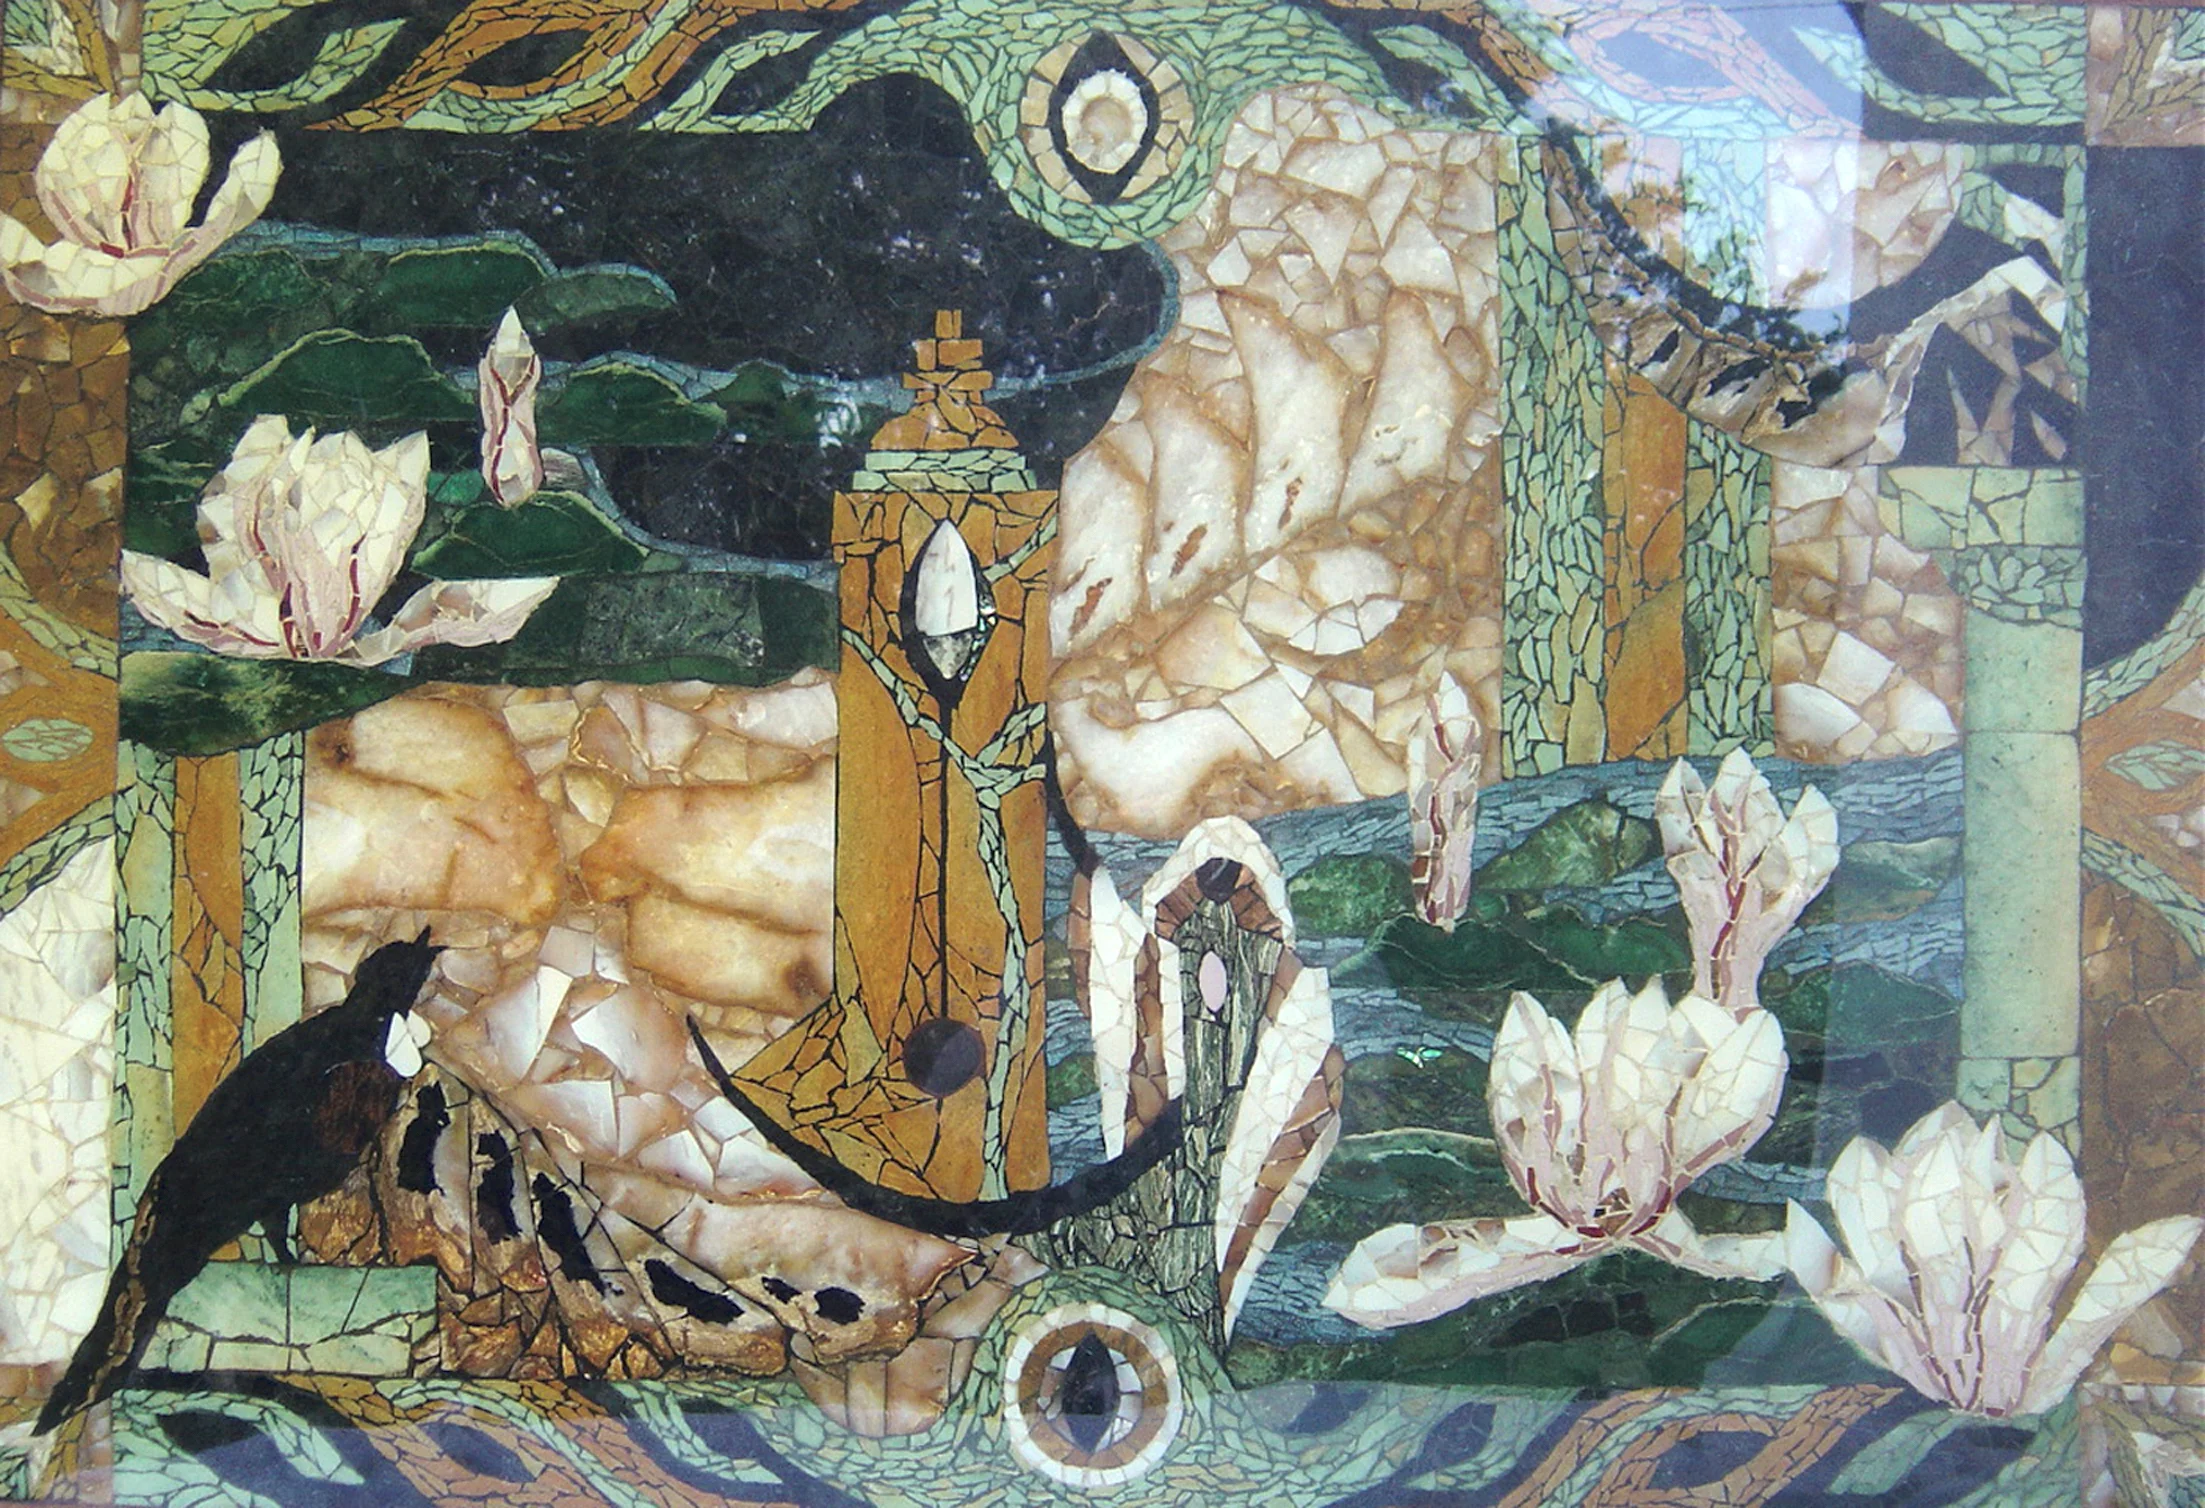 Pietra Dura Stone Artwork, hard stone used in commesso mosaic work, painting with semiprecious stones and glass inlaid, and mosaic in a table. Floating magnolia, hills and rivers, a protective angel a singing Tui, with a magical tower. An original authentic keepsake and eclectic artisan heirloom created by NZ artist Michele Bluck